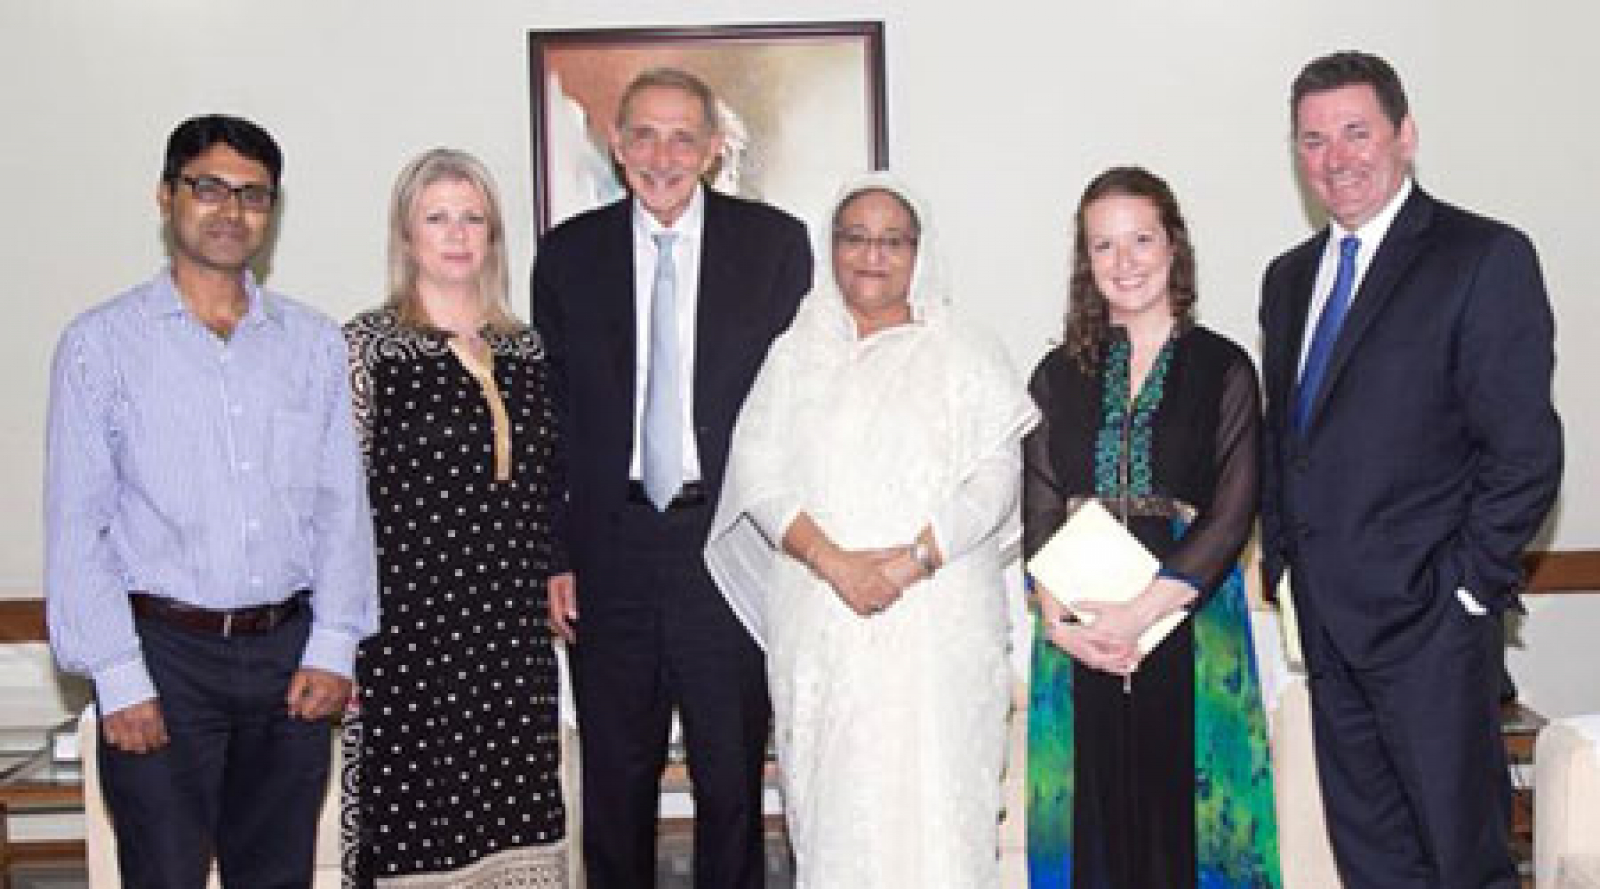 Meeting with Prime Minister Highlights NDI Democracy Work in Bangladesh